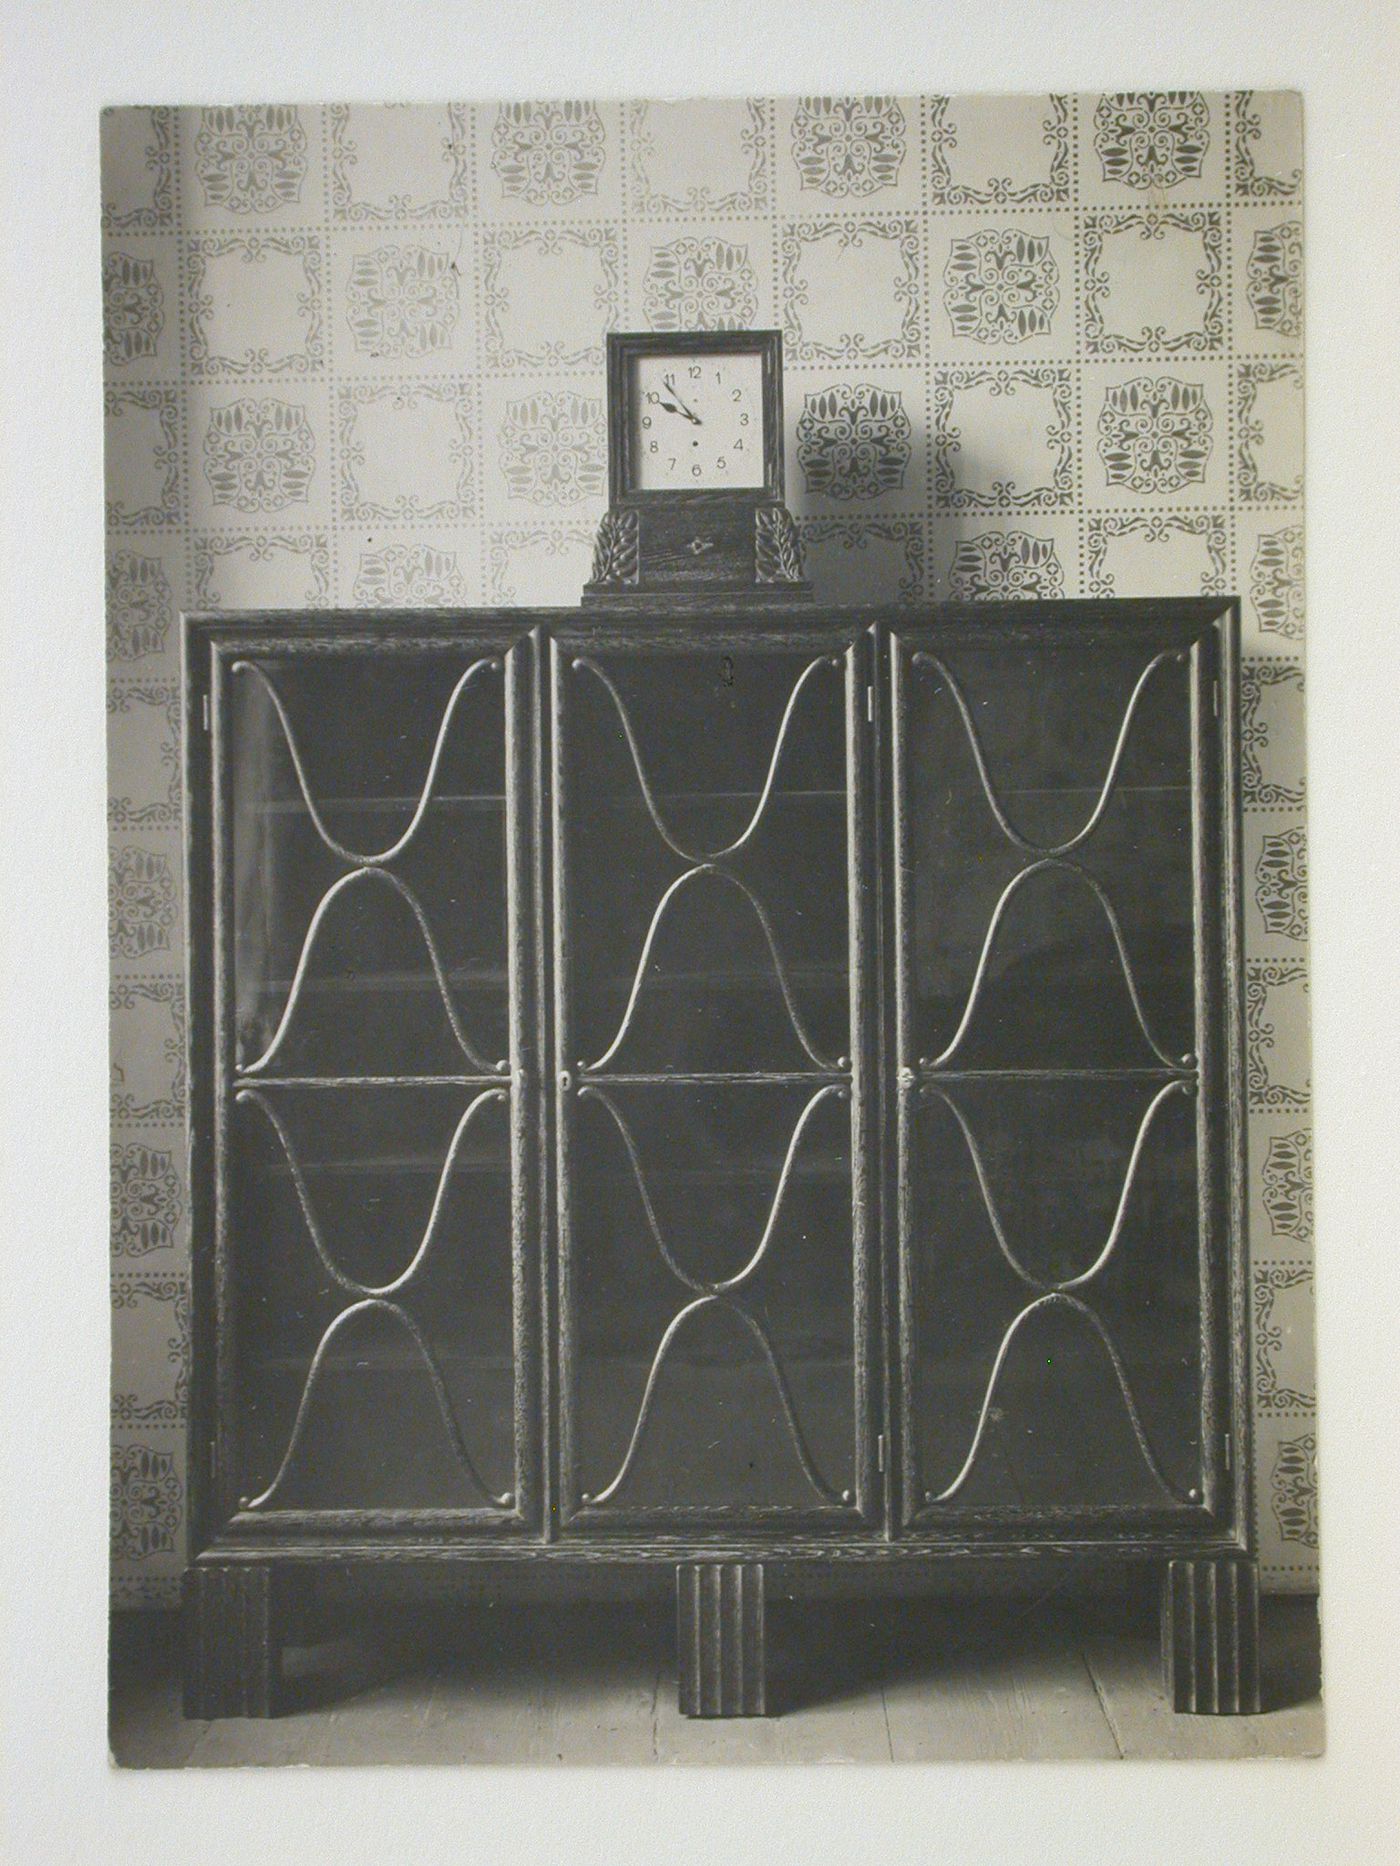 View of a cabinet with a clock on top for the Hodlers' apartment, Geneva, Switzerland